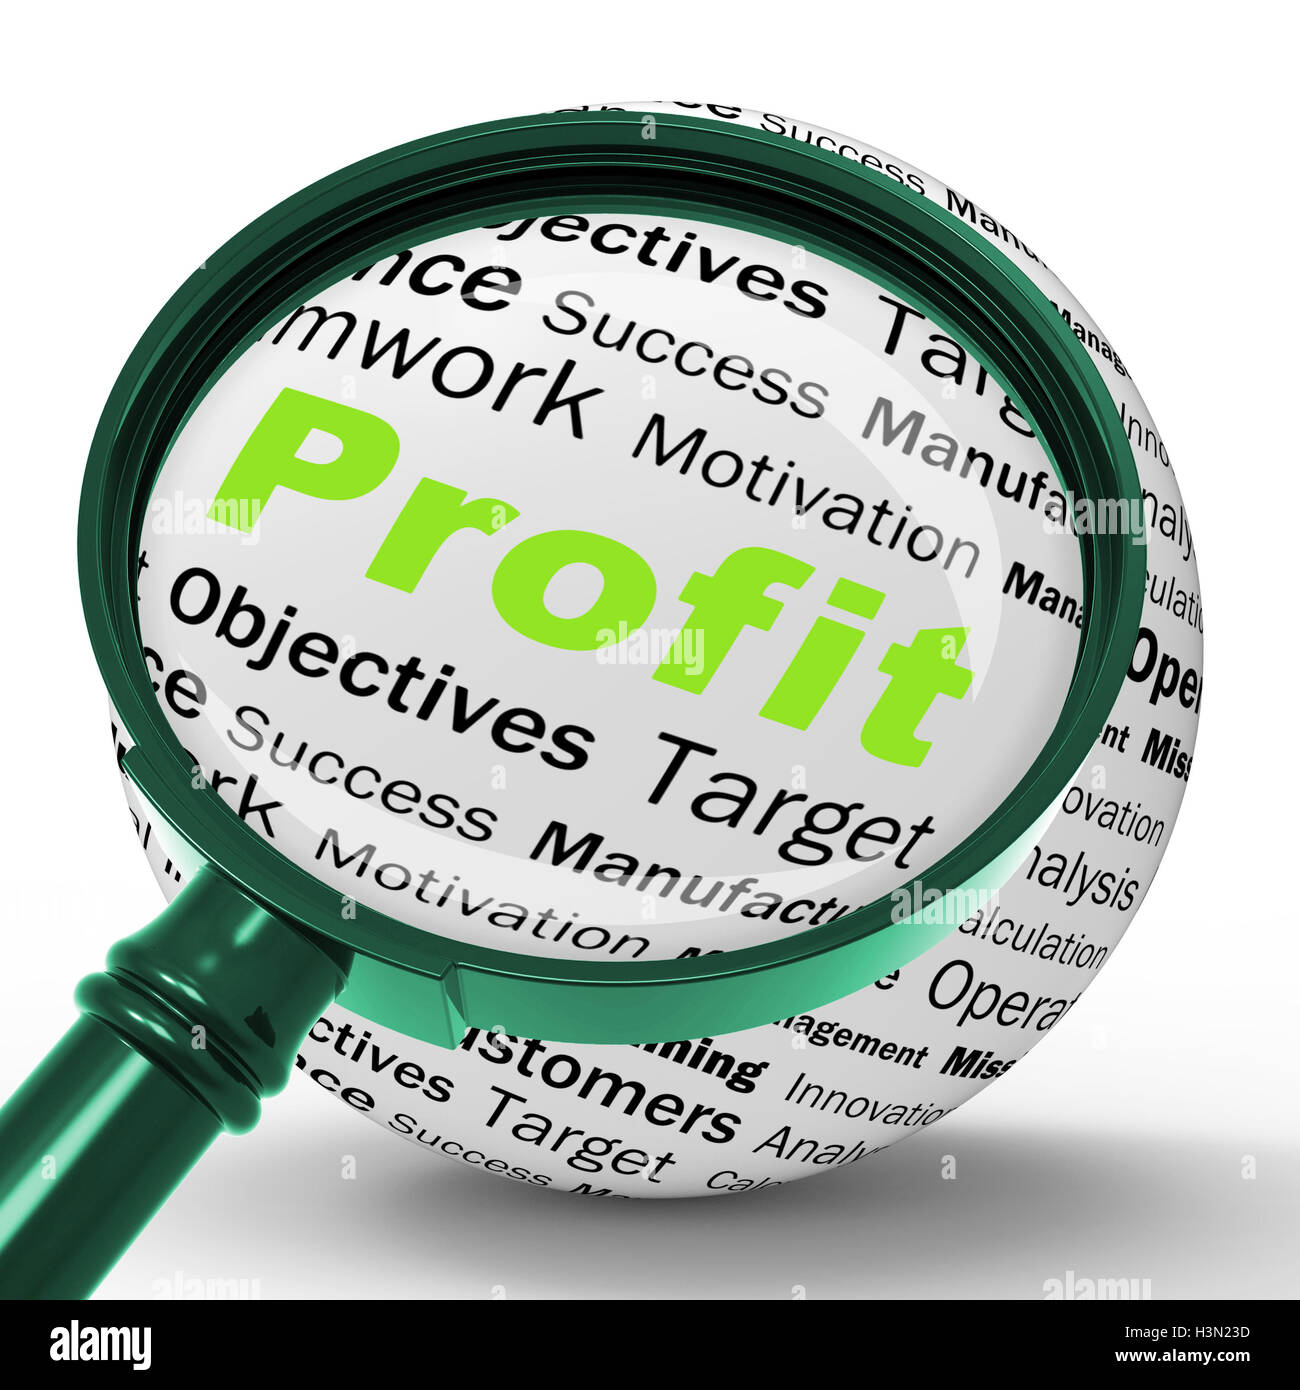 Profit Magnifier Definition Means Company Growth Or Performance Stock Photo